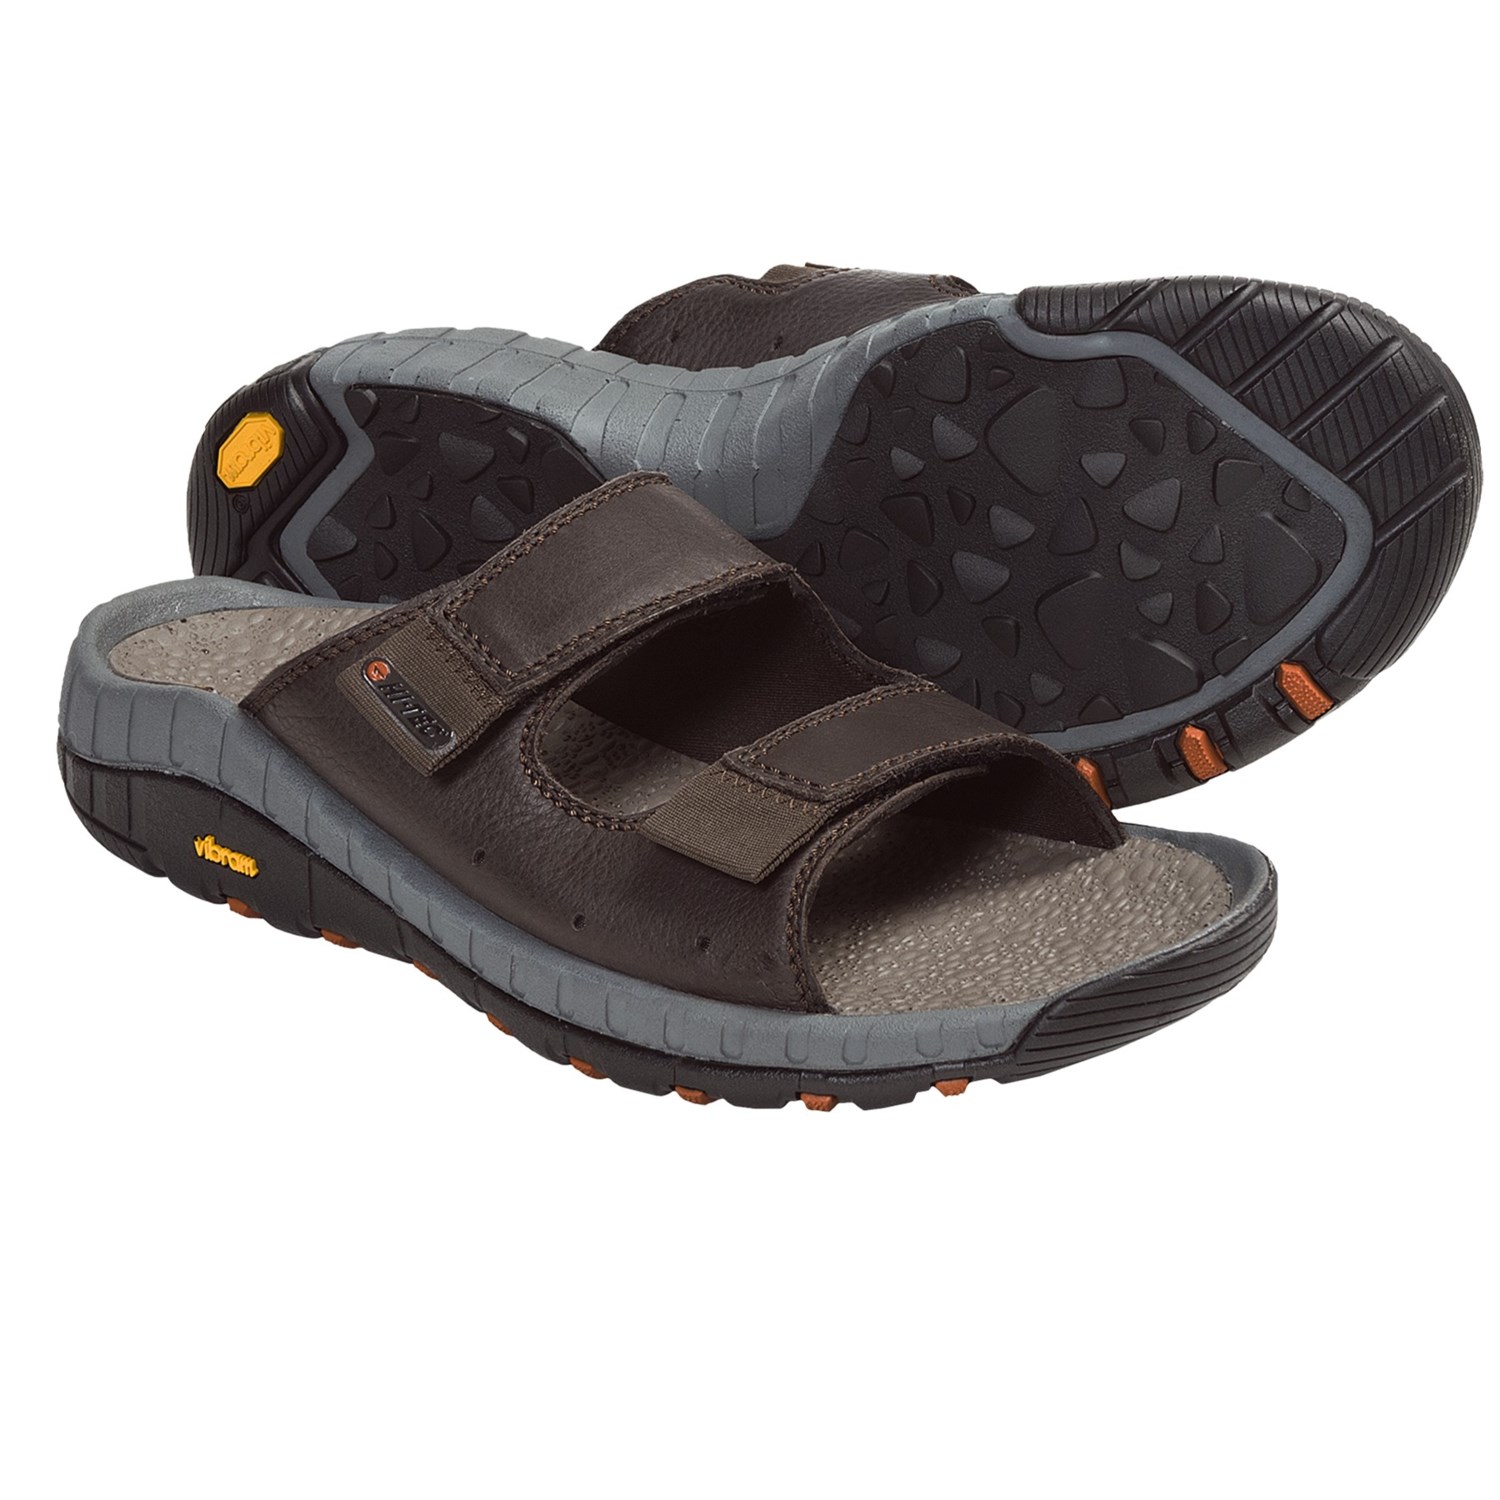 ... Tec Sierra Canyon Slide Sandals - Leather (For Men) in Dark Chocolate